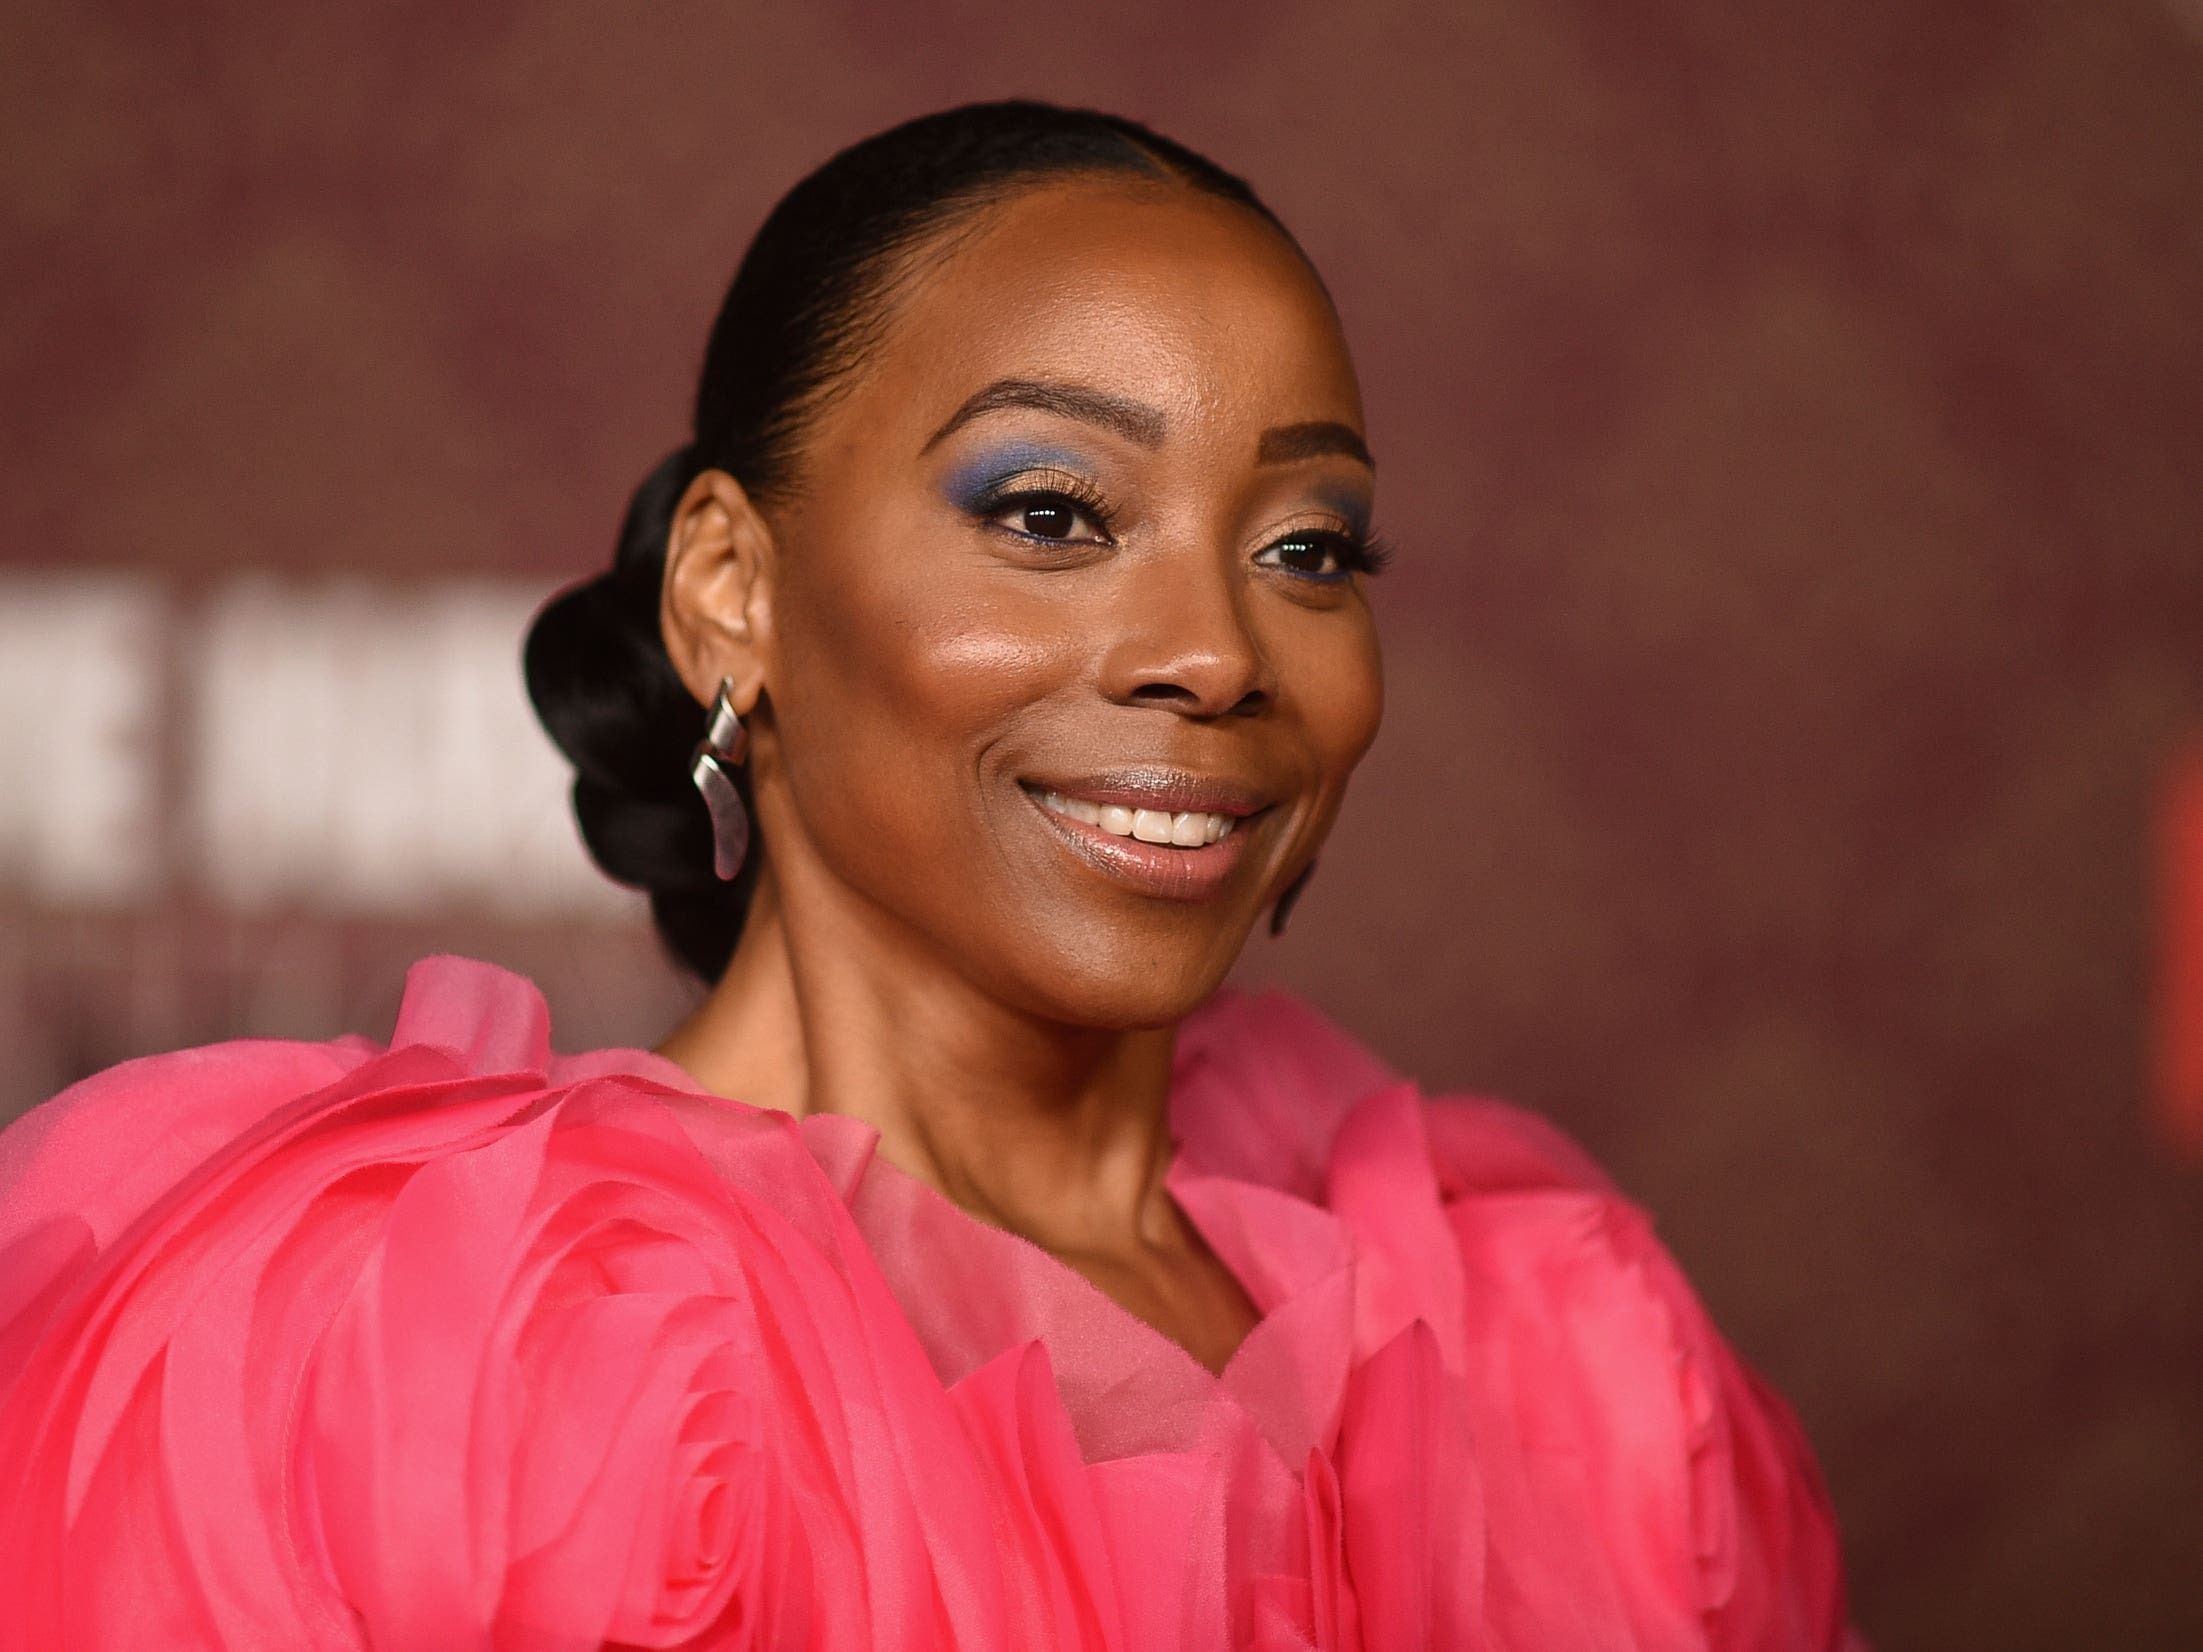 Actress and comedian Erica Ash dies aged 46